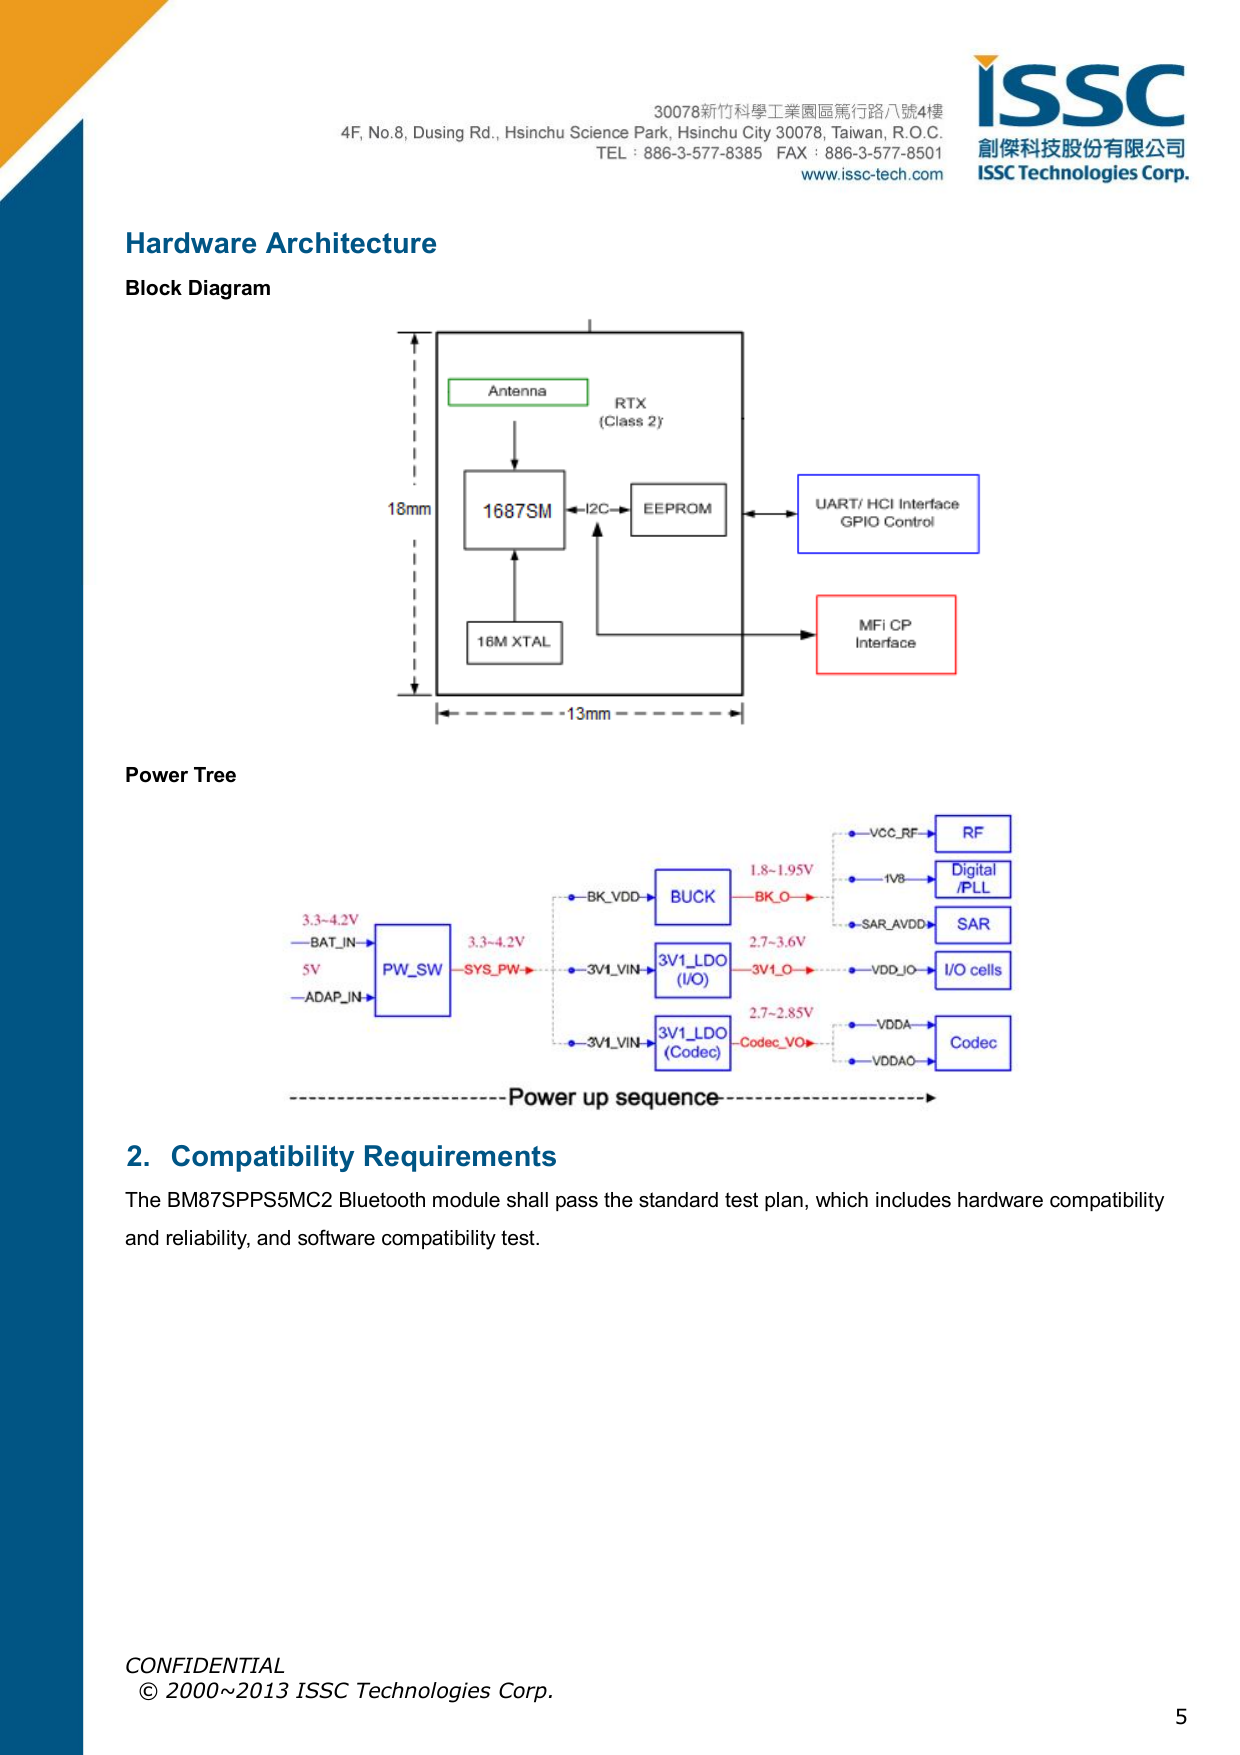  CONFIDENTIAL © 2000~2013 ISSC Technologies Corp. 5 Hardware Architecture Block Diagram  Power Tree  2.  Compatibility Requirements The BM87SPPS5MC2 Bluetooth module shall pass the standard test plan, which includes hardware compatibility and reliability, and software compatibility test.  